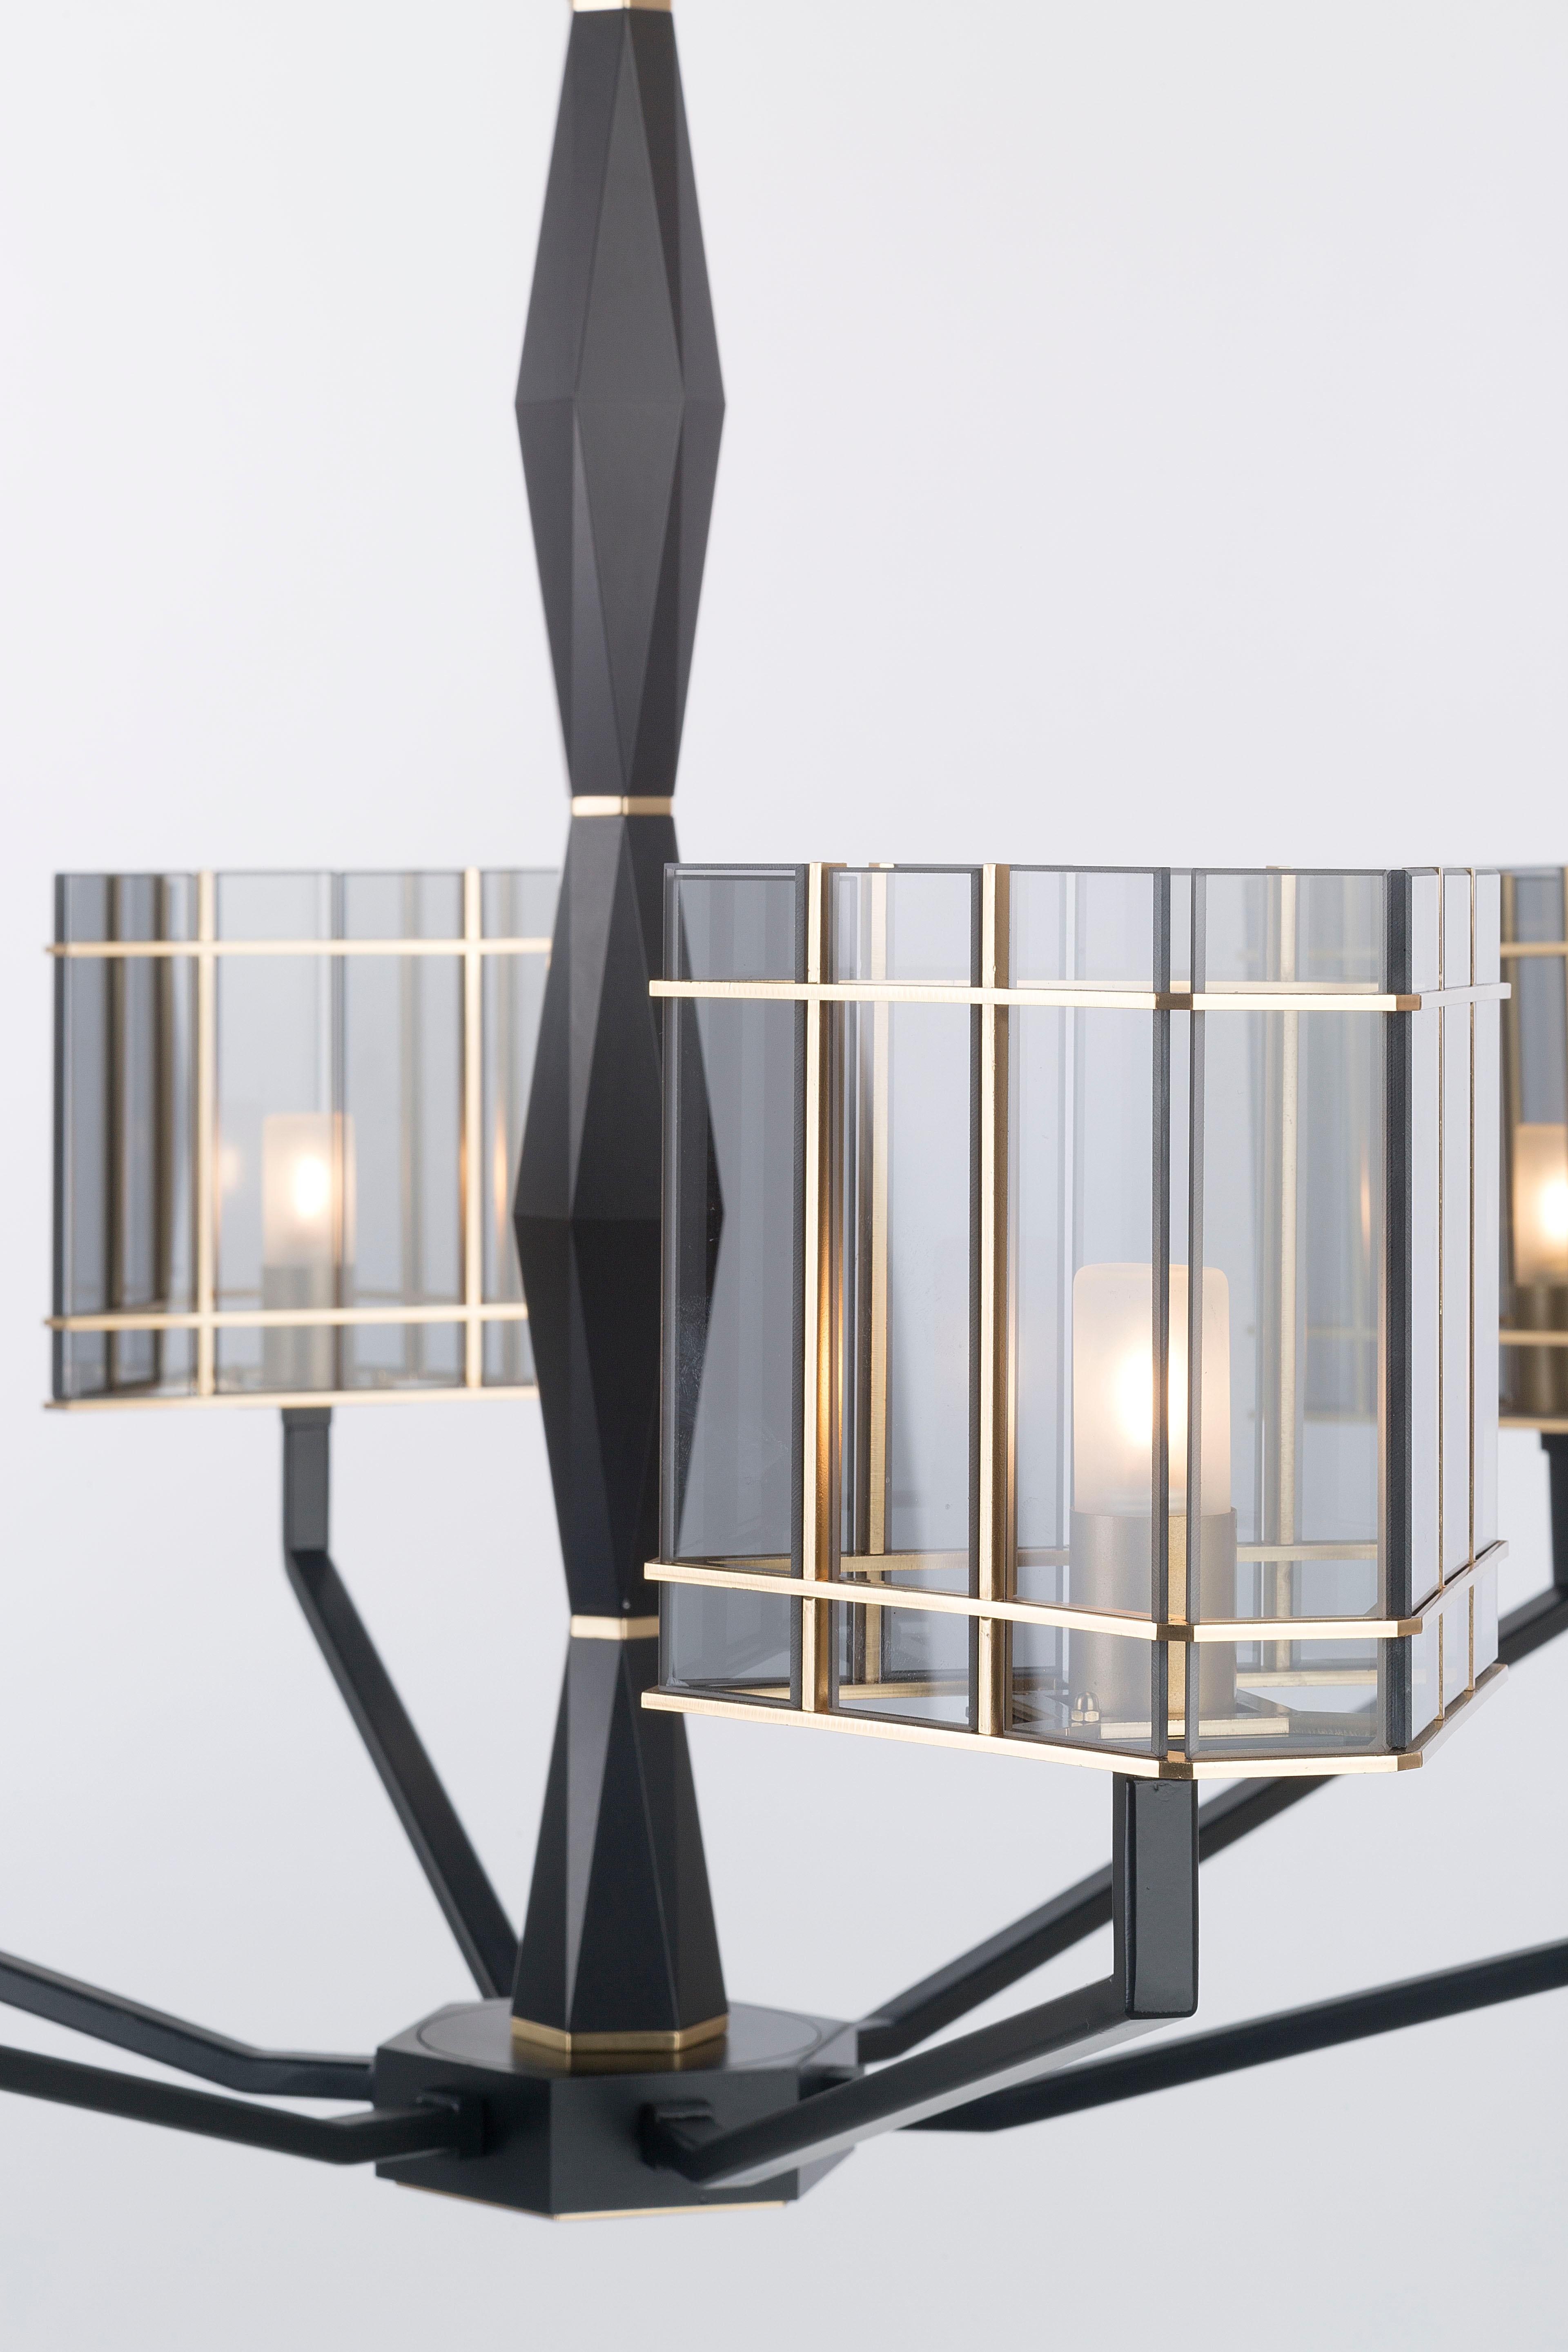 Top Glass collection, a sophisticated line where the matte black finish designs geometries on the solid faceted structure and the shades are composed of glass elements in golden cages. 

Shades in transparent glass elements in fumè color, central